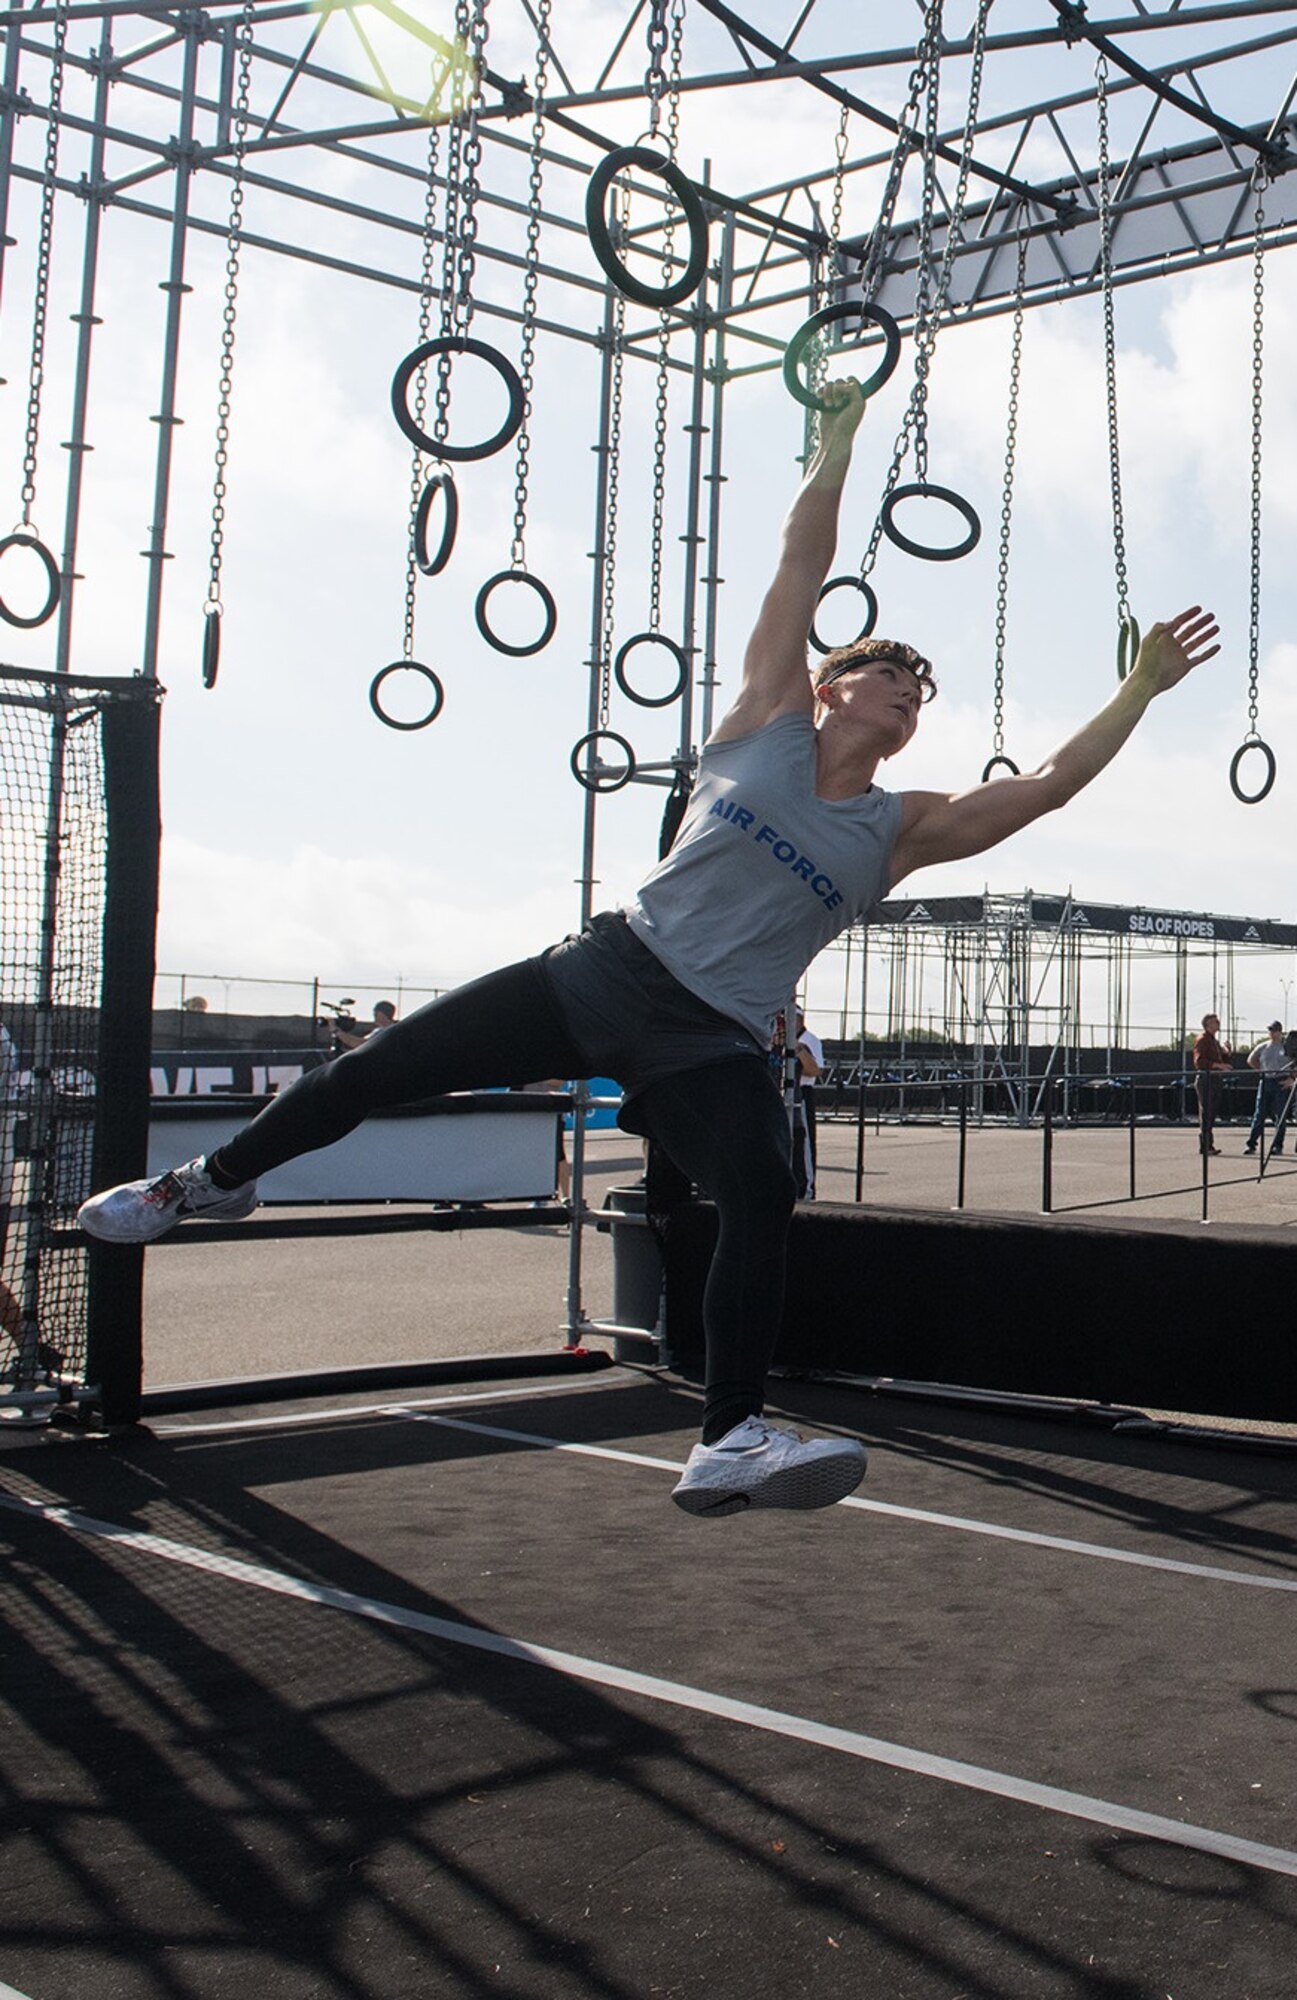 2nd Lt. Michelle Strickland takes to the rings during the 2019 Air Force Alpha Warrior Final Battle at Retama Park, Selma, Texas, Sept. 12, 2019. Air Force, Army and Navy military athletes competed against each other to determine the top three men and three women for each service. Those athletes make up the service teams that will go against each other during the 2019 Inter-Service Battle Sept. 14 at Retama. The Air Force partnered with Alpha Warrior three years ago to deliver functional fitness training to Airmen and their families.